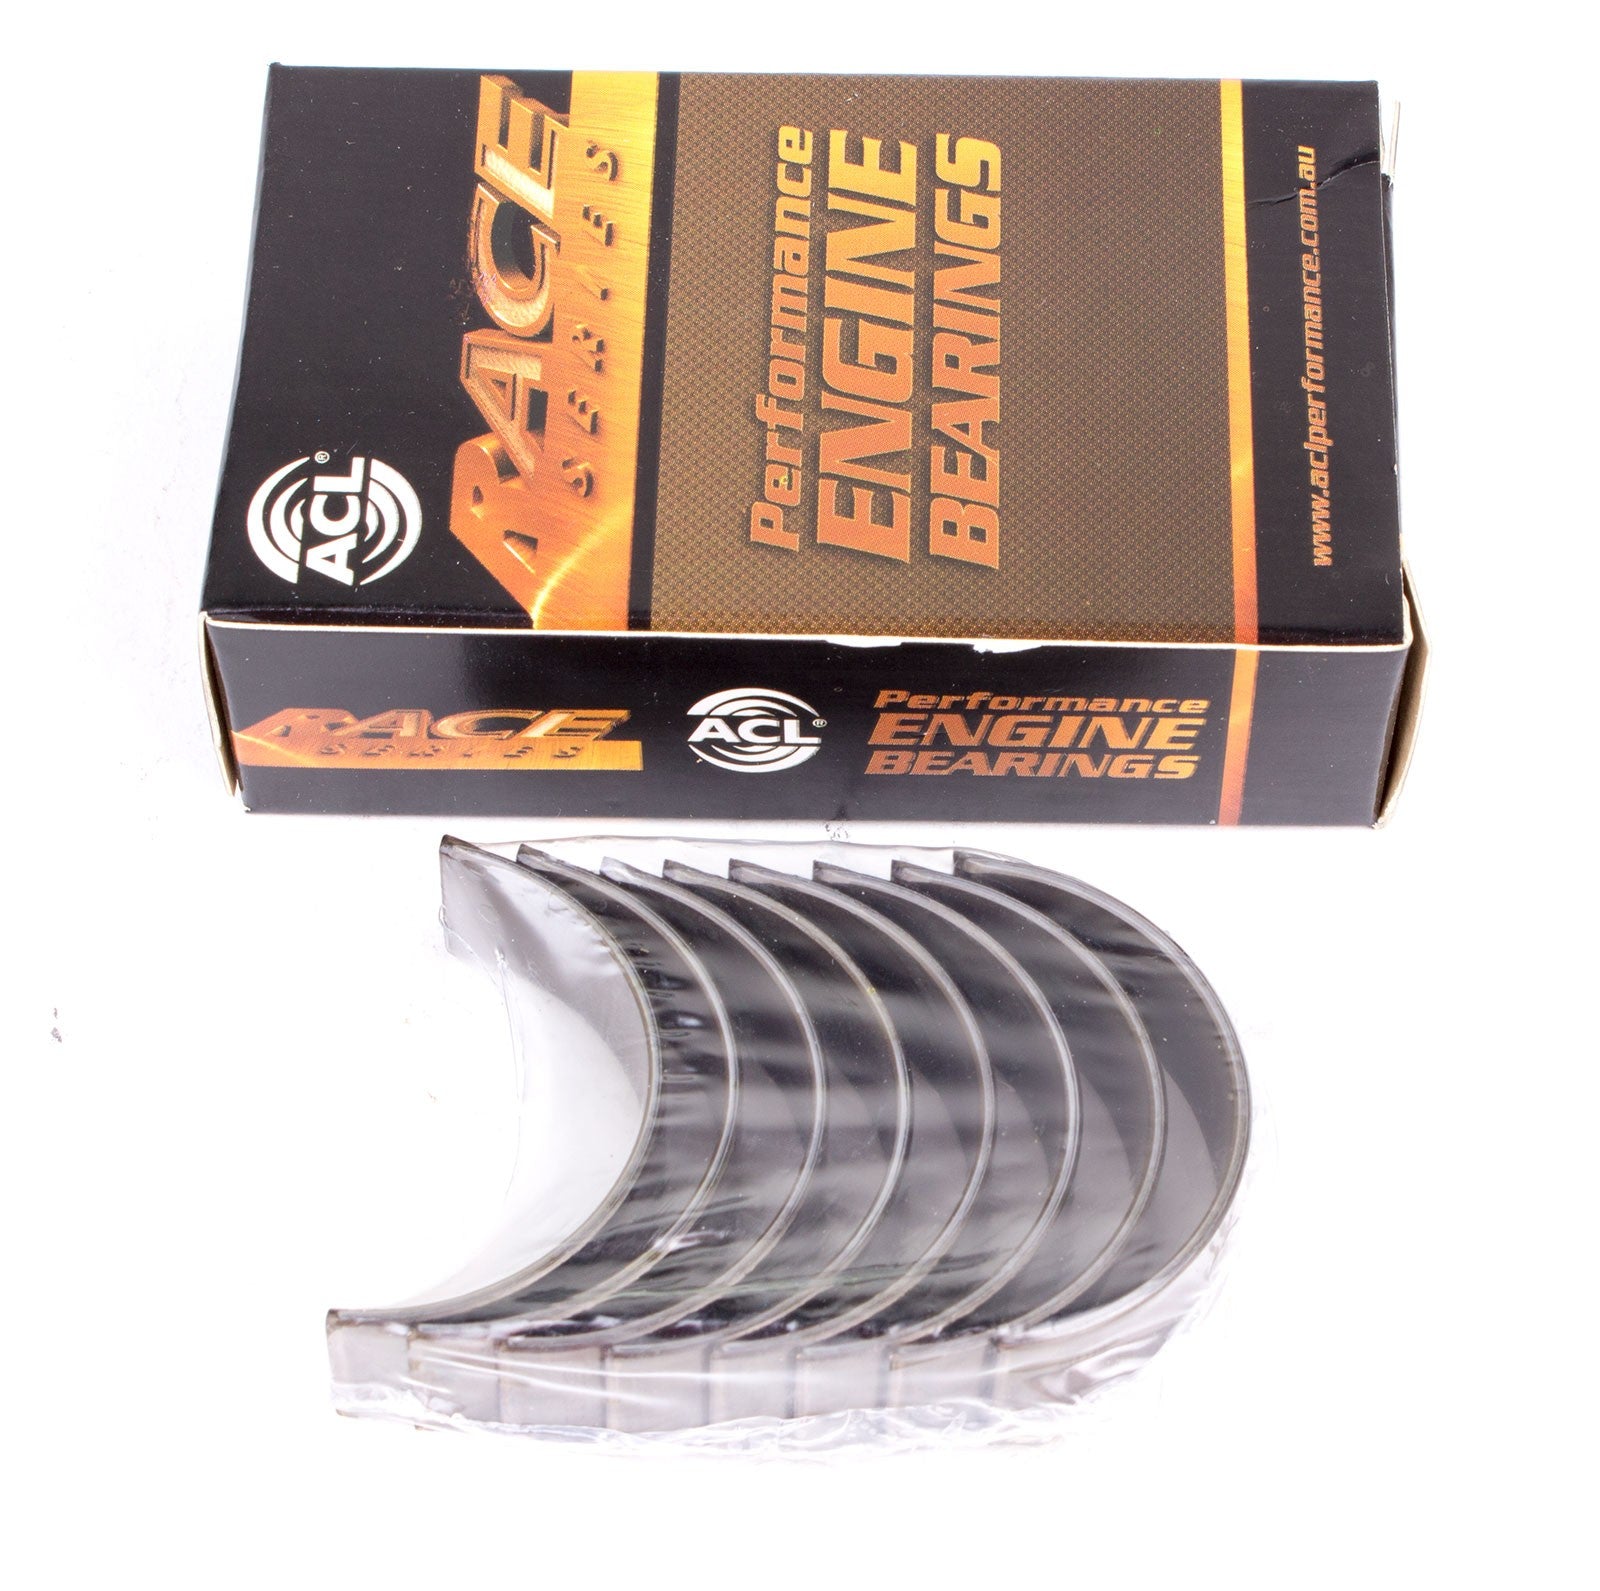 ACL 5M1039H-001 Main bearing set (ACL Race Series) Photo-0 